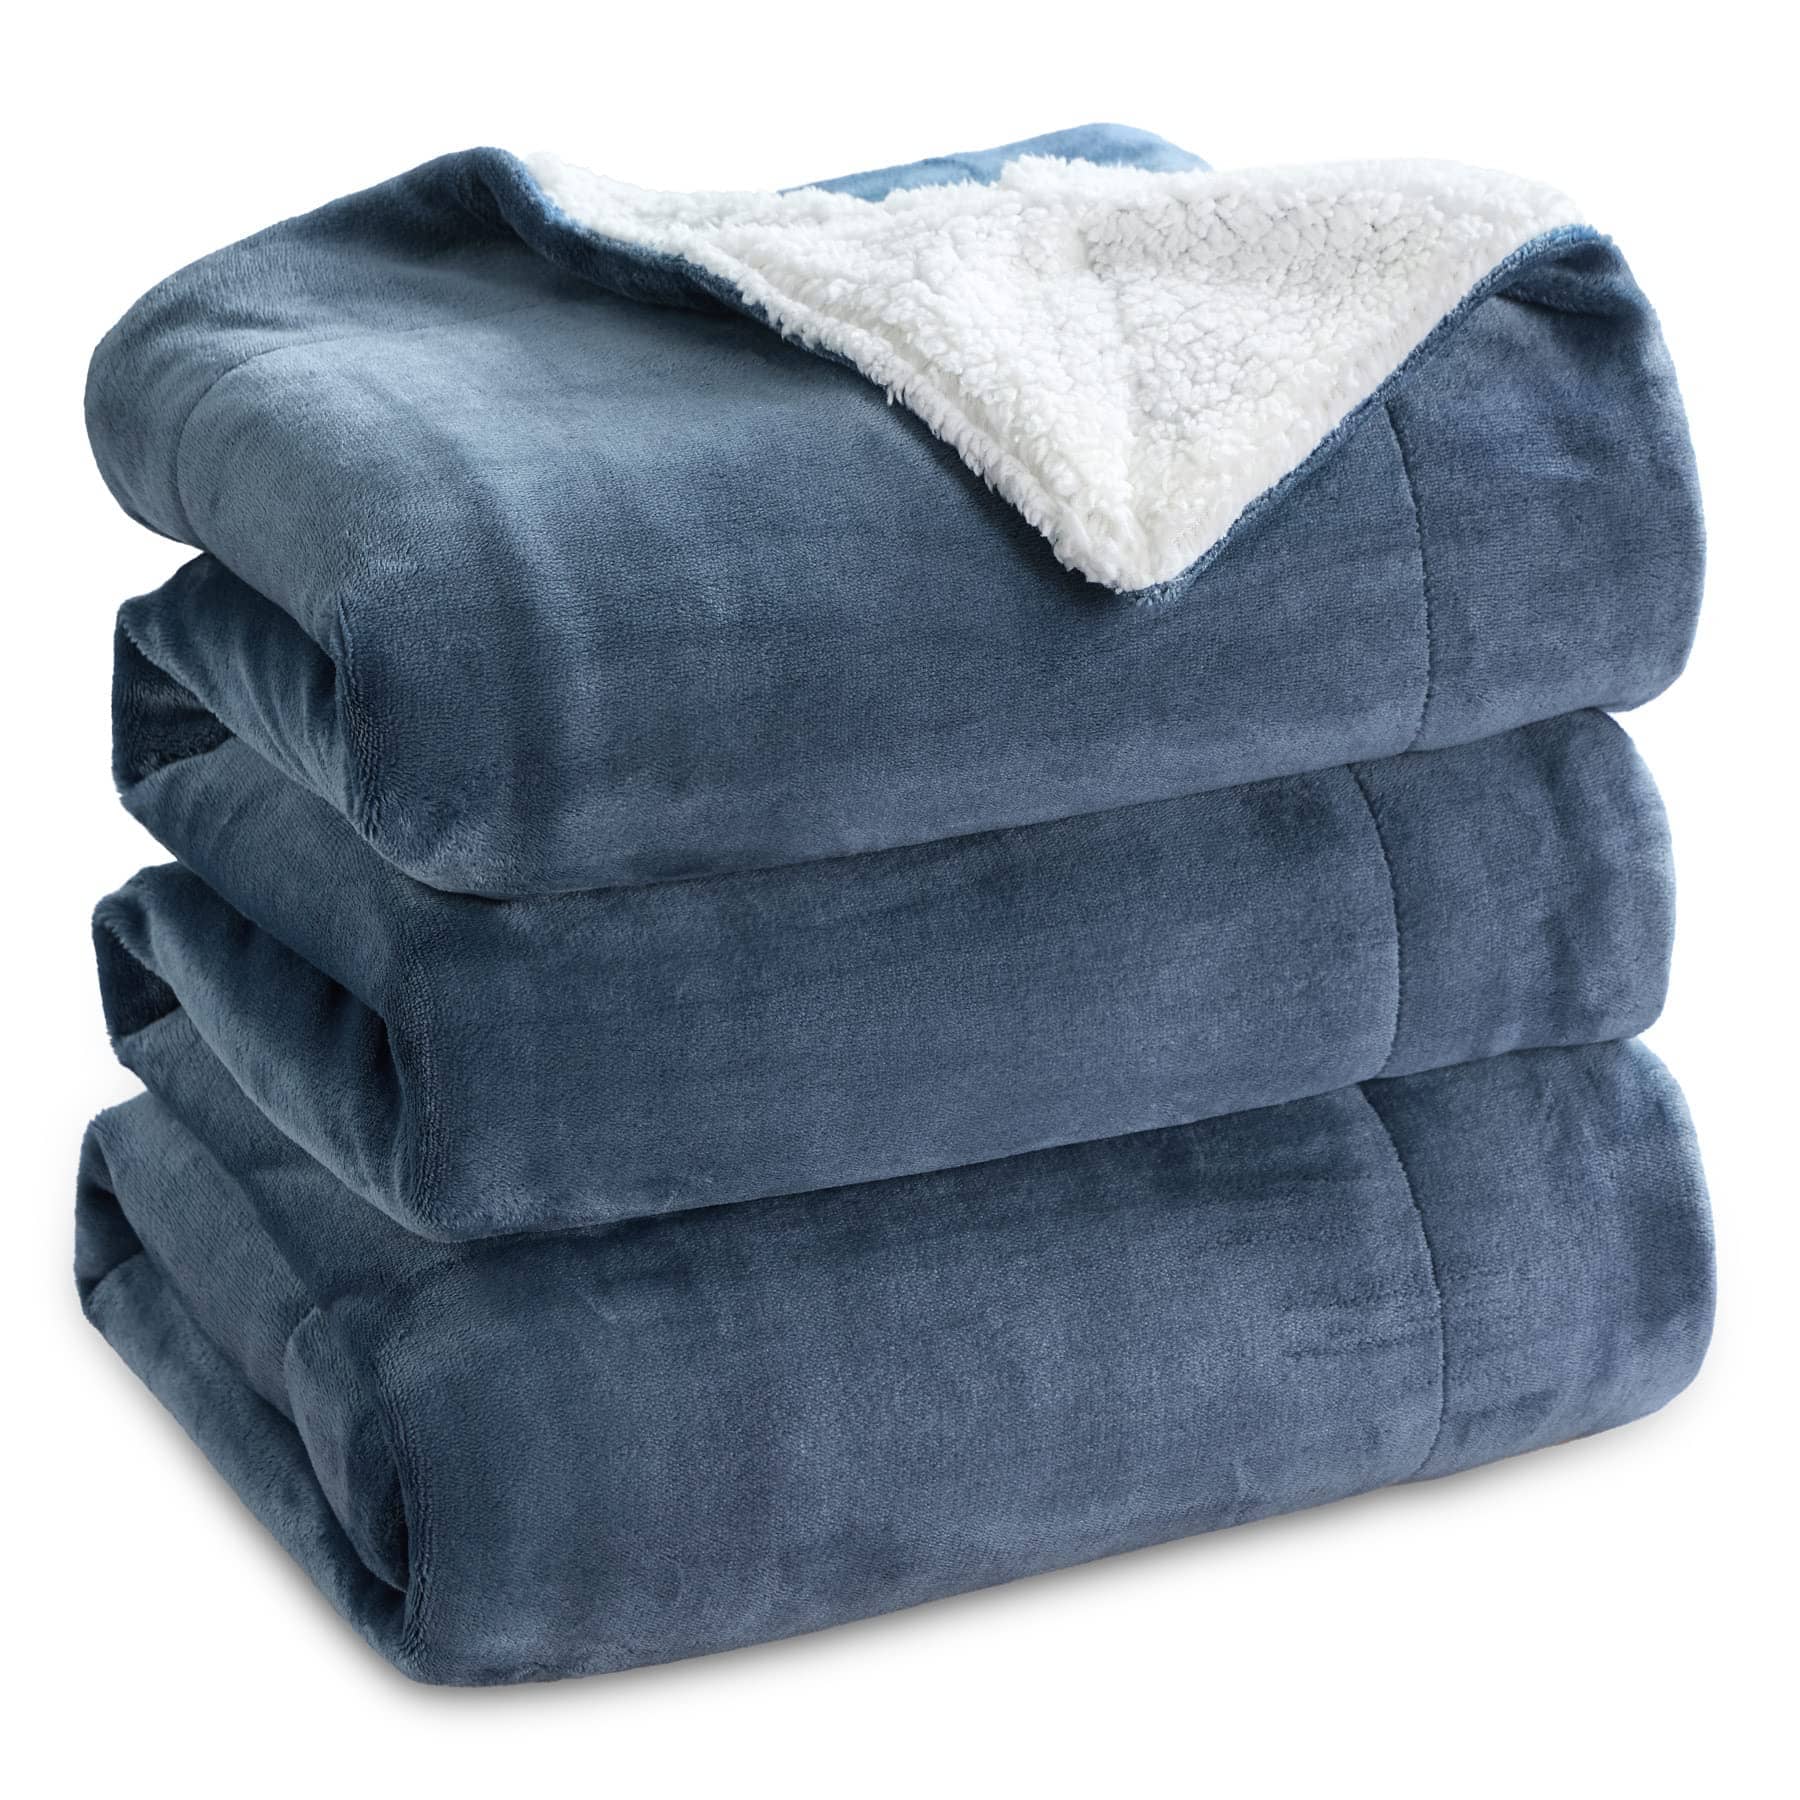 Bedsure Sherpa Fleece King Size Blanket for Bed - Thick and Warm for Winter, Soft and Fuzzy Large Blanket King size, Navy, 108x90 Inches